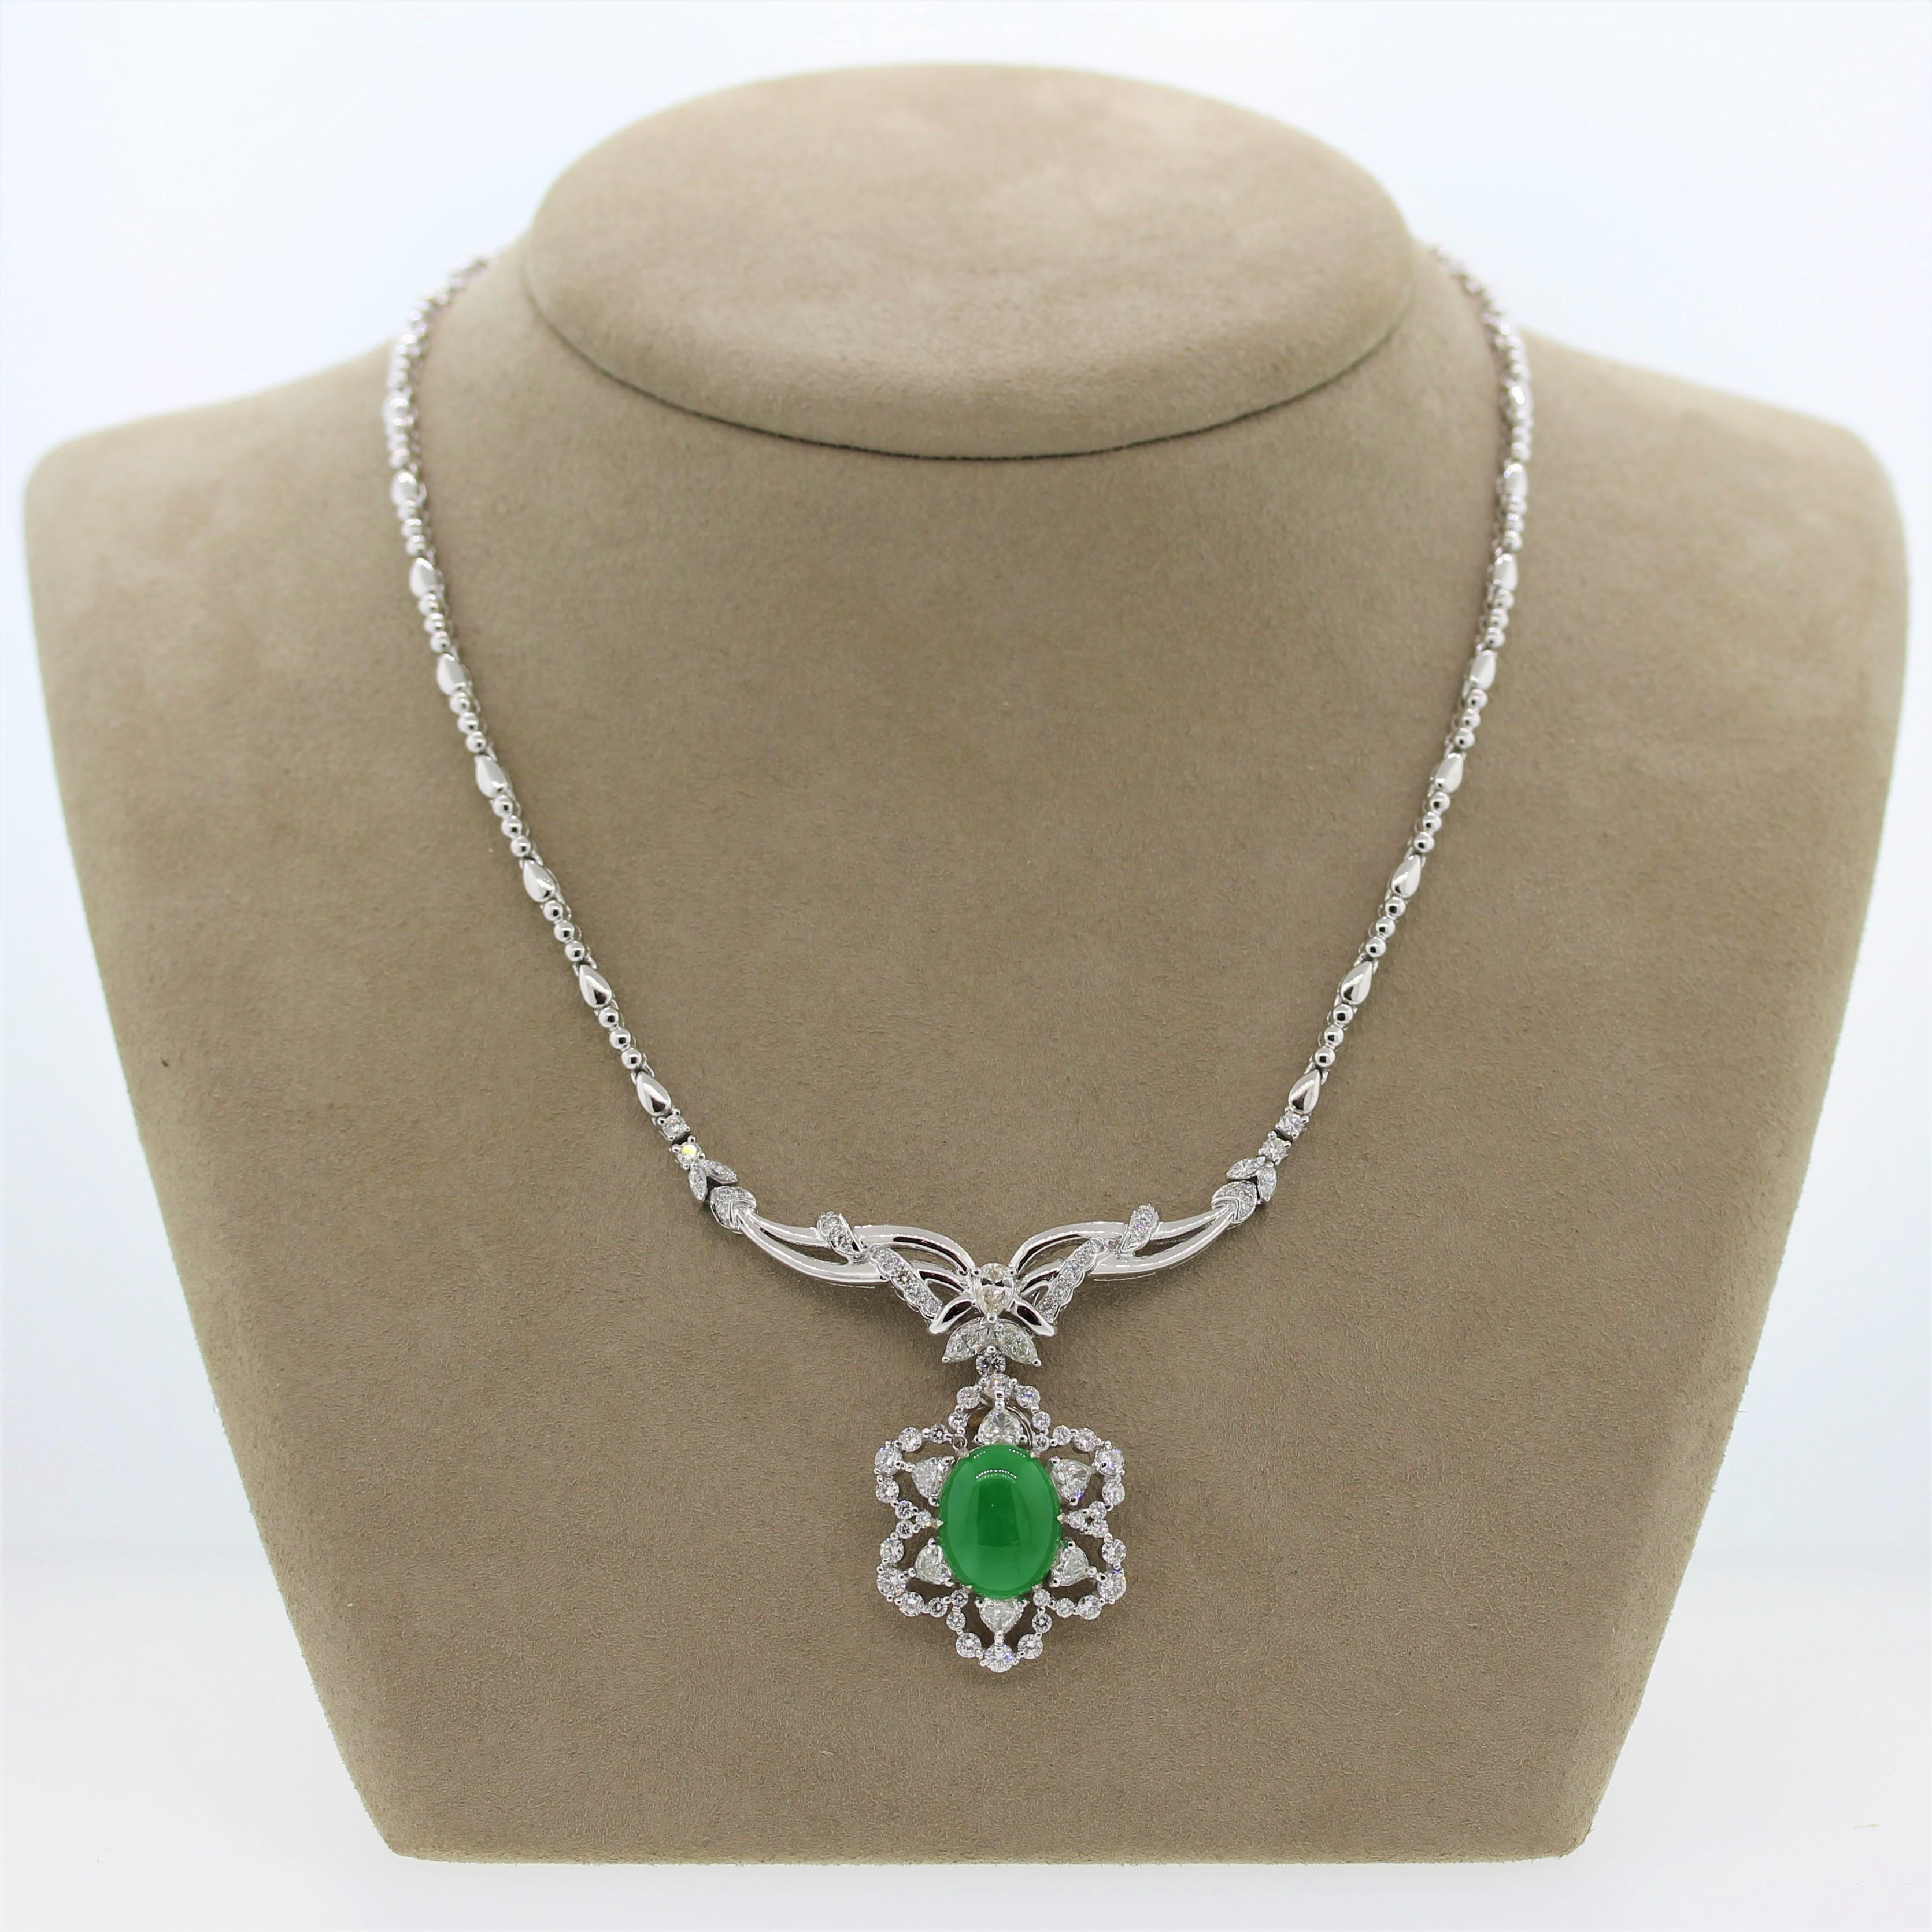 An indulgent necklace featuring a 5.28 carat natural jadeite jade. The oval shaped gemstone is accented by 4.26 carats of heart, round and marquise cut diamonds and a single pear cut. The platinum setting has a prominent filigree design that